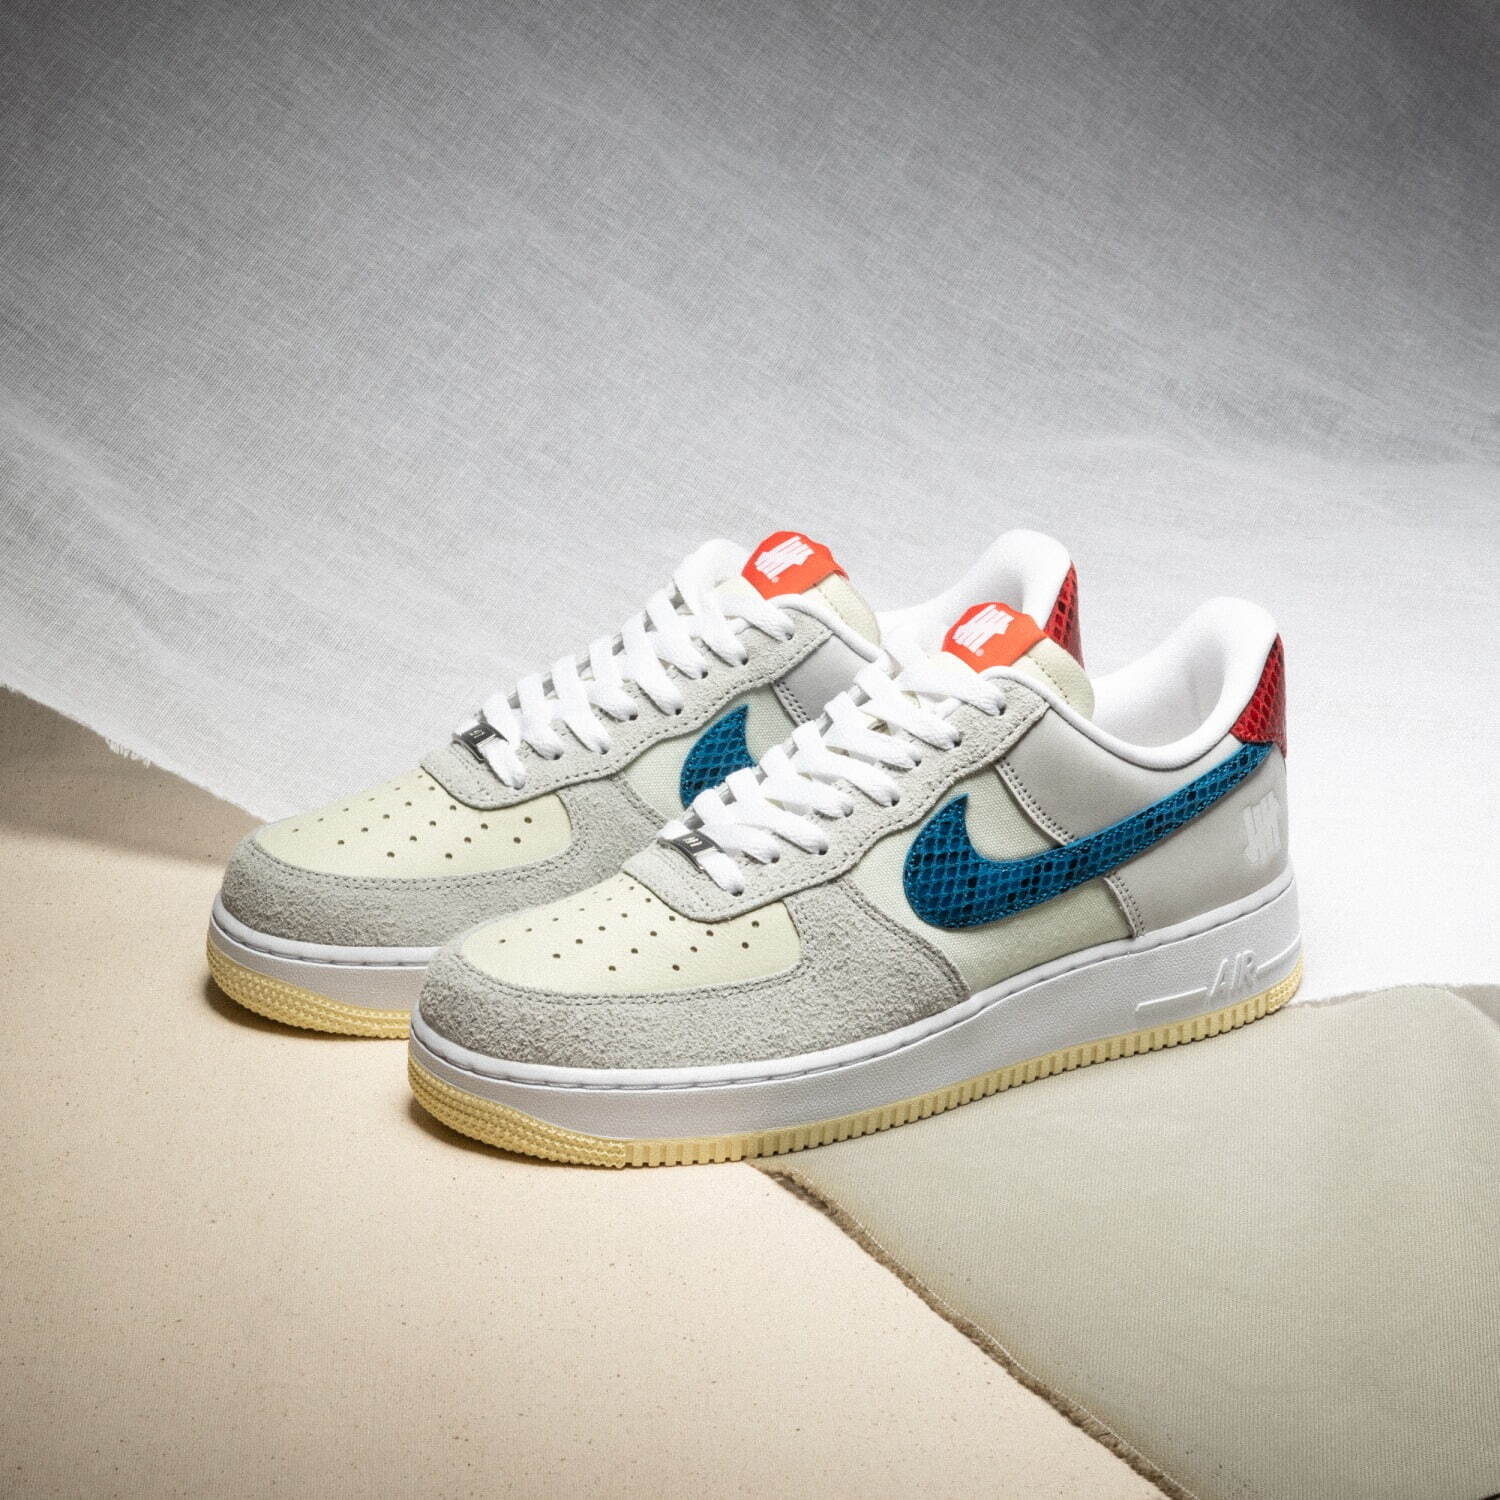 UNDEFEATED NIKE AIR FORCE 1  ナイキエアフォース1